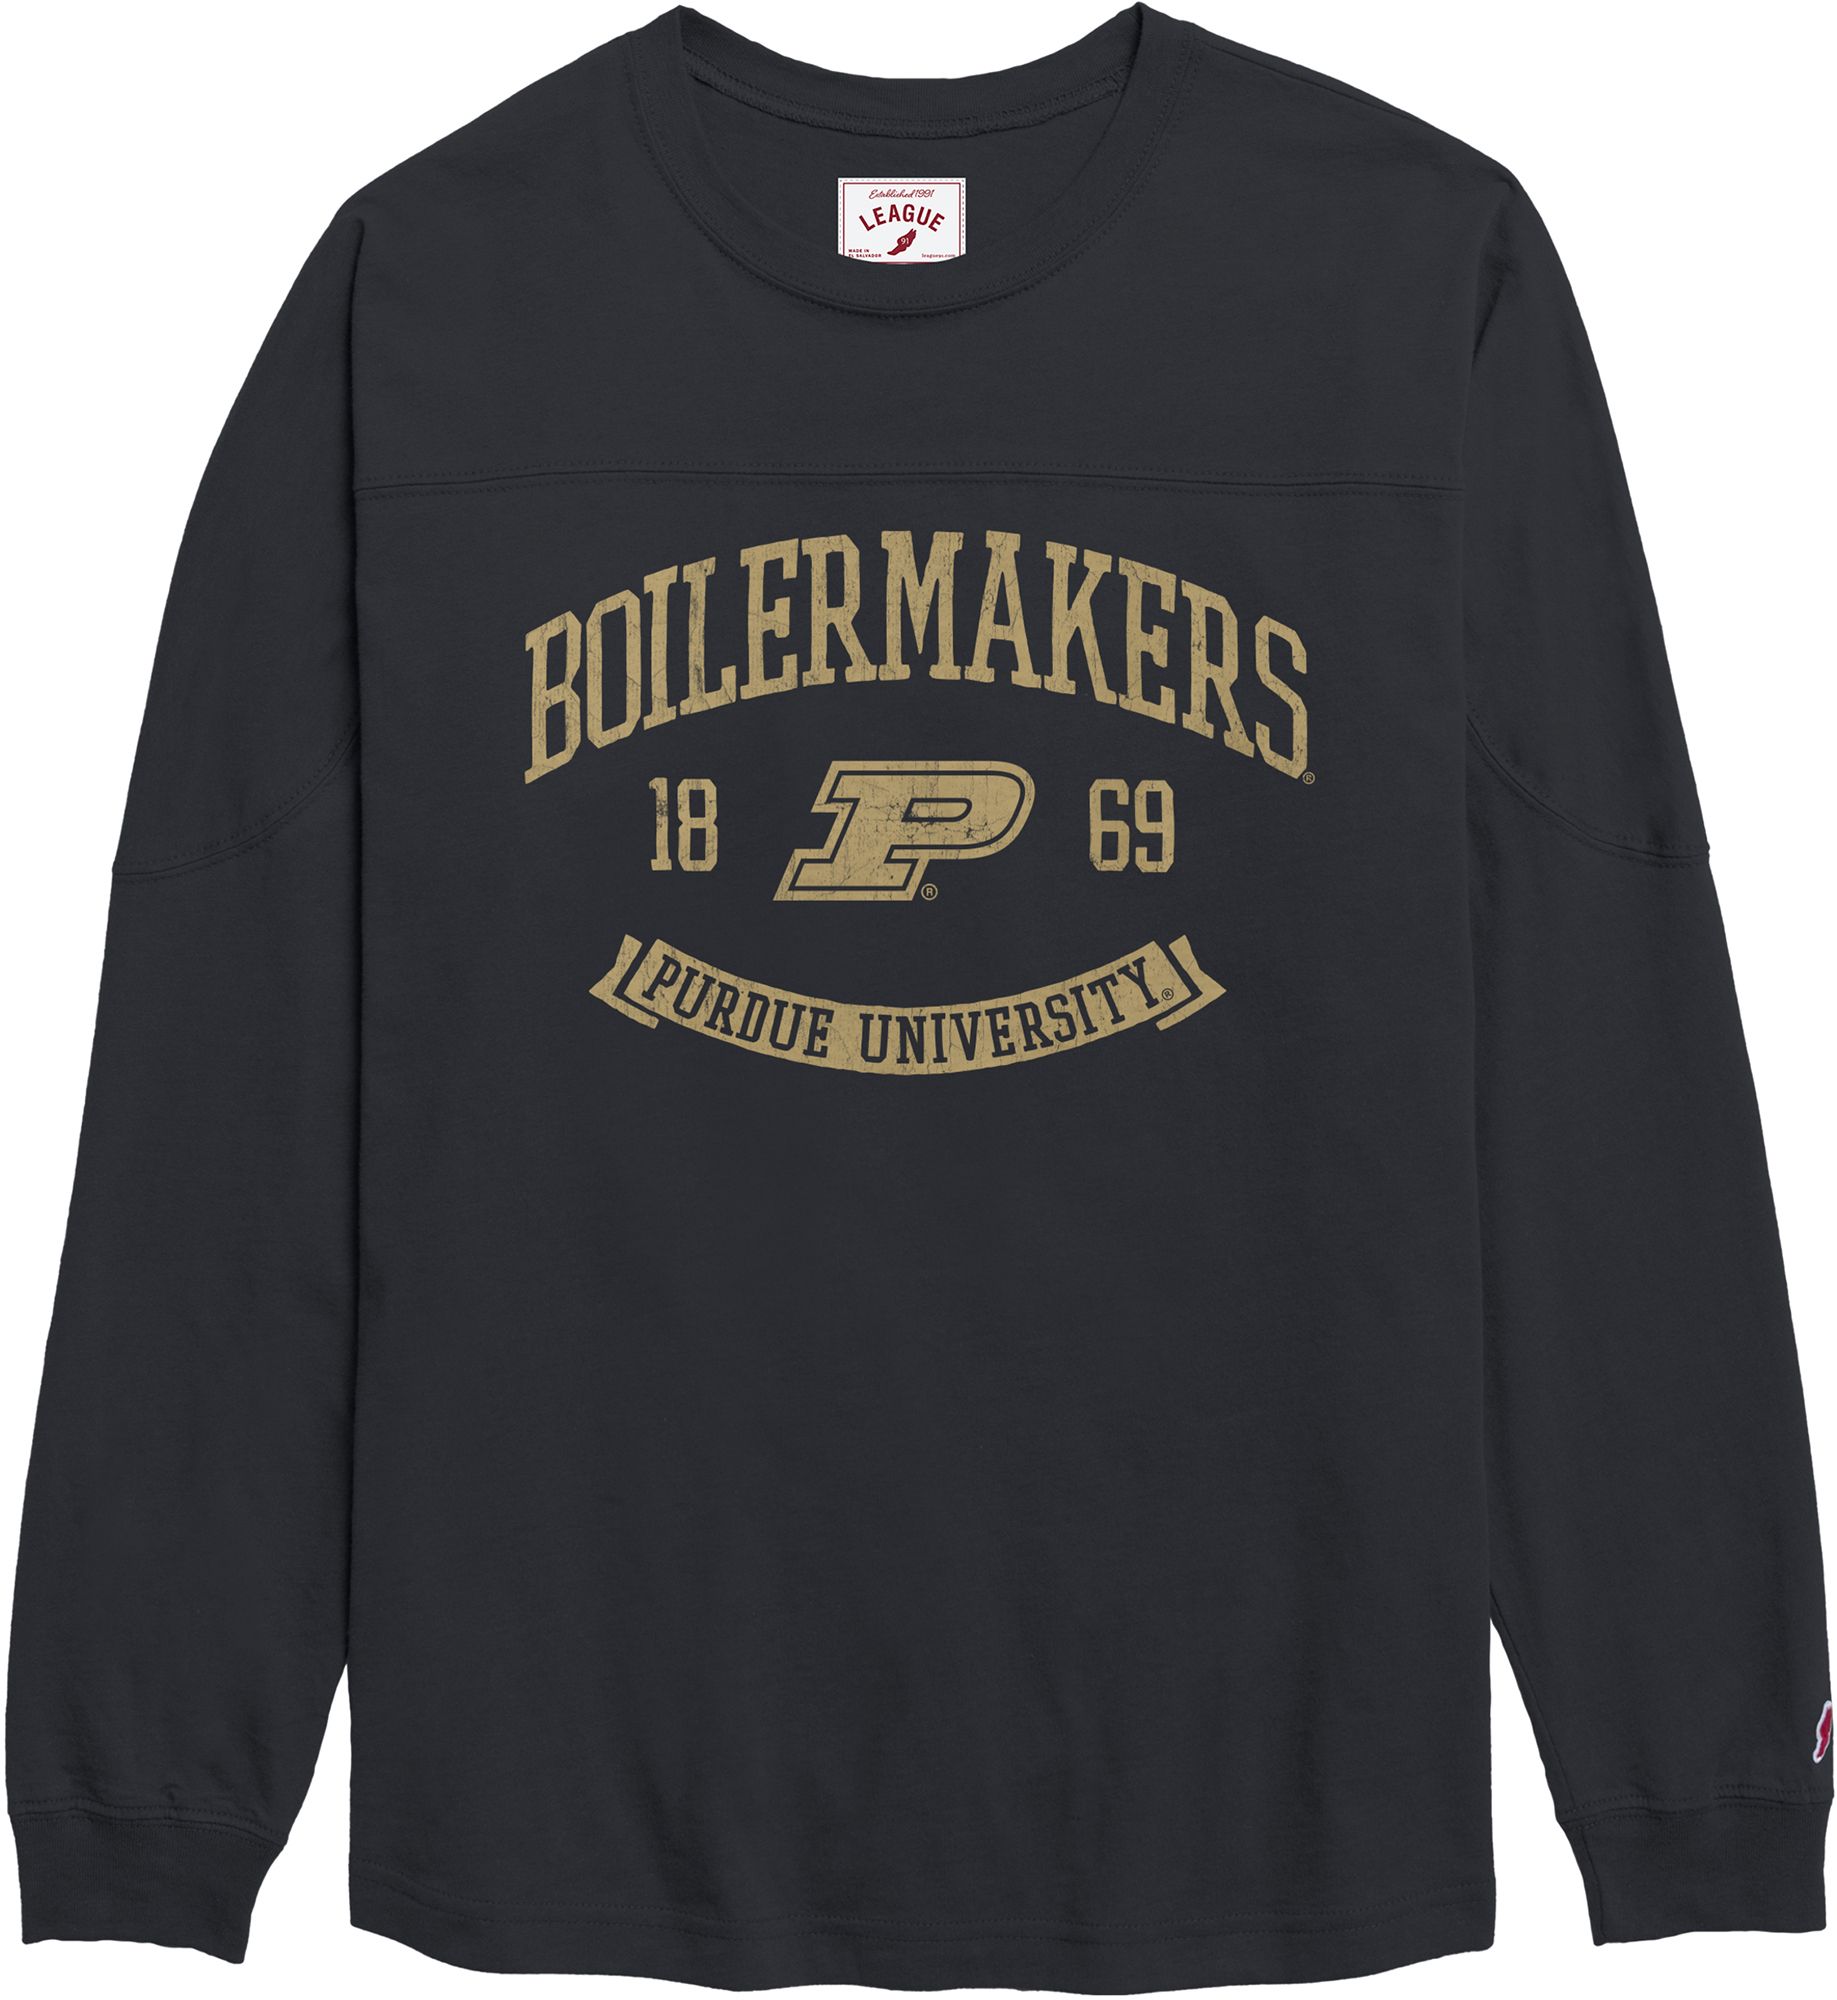 Boilermakers cross country jersey